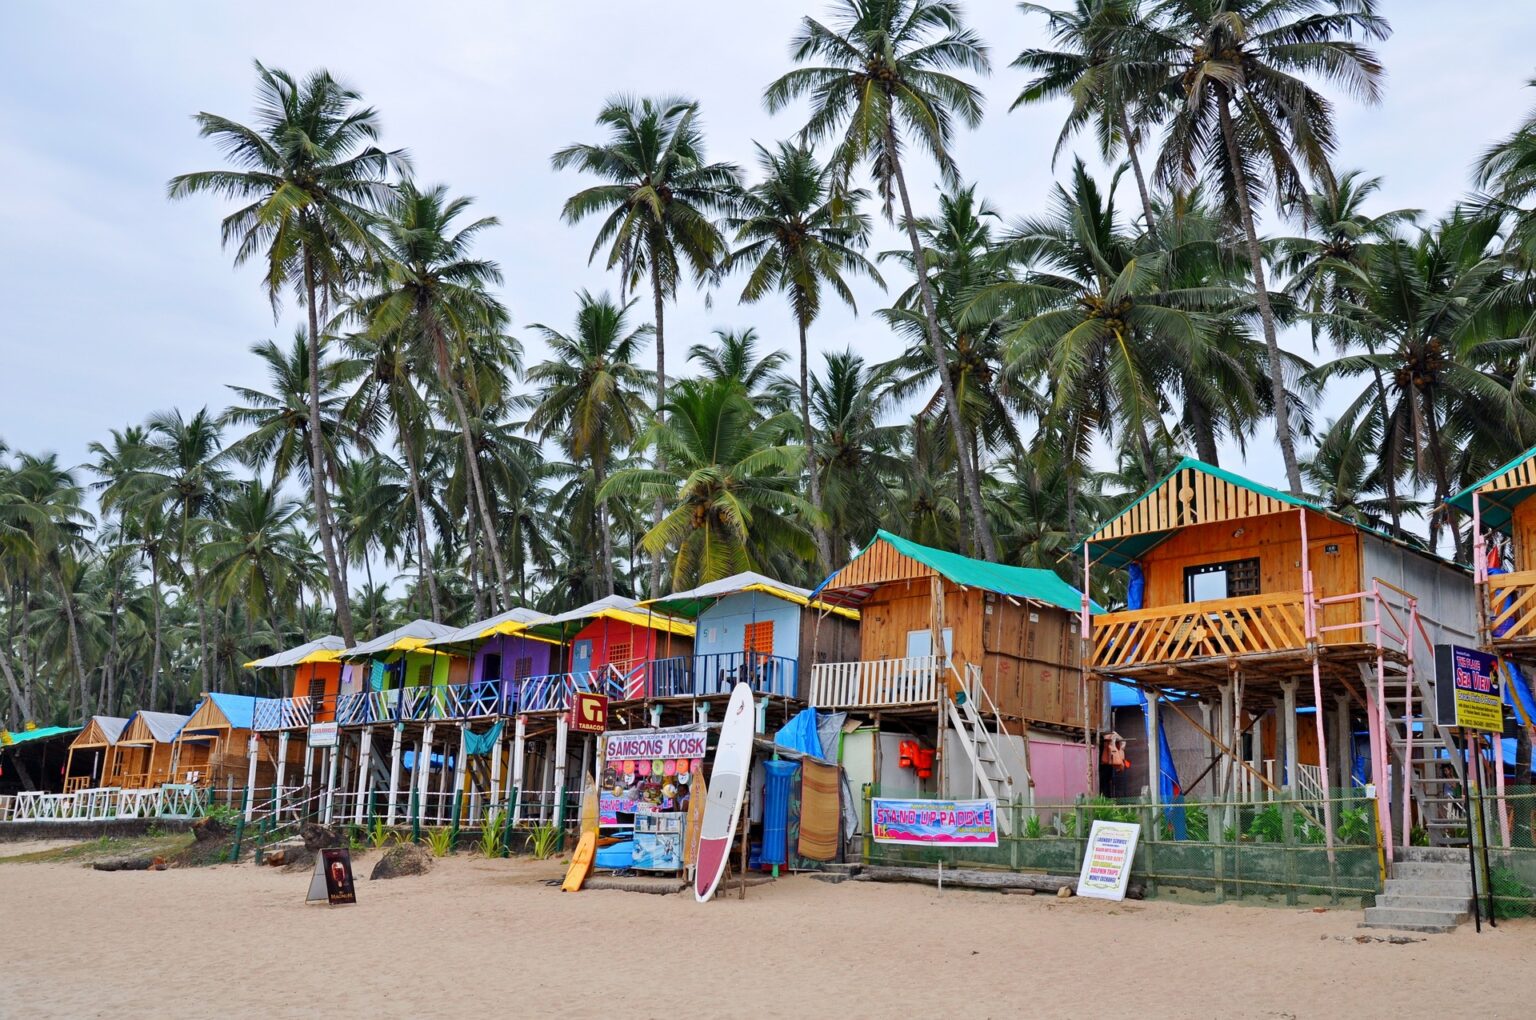 Road Trip From Mumbai To Goa - The Perfect Post-Lockdown Trip